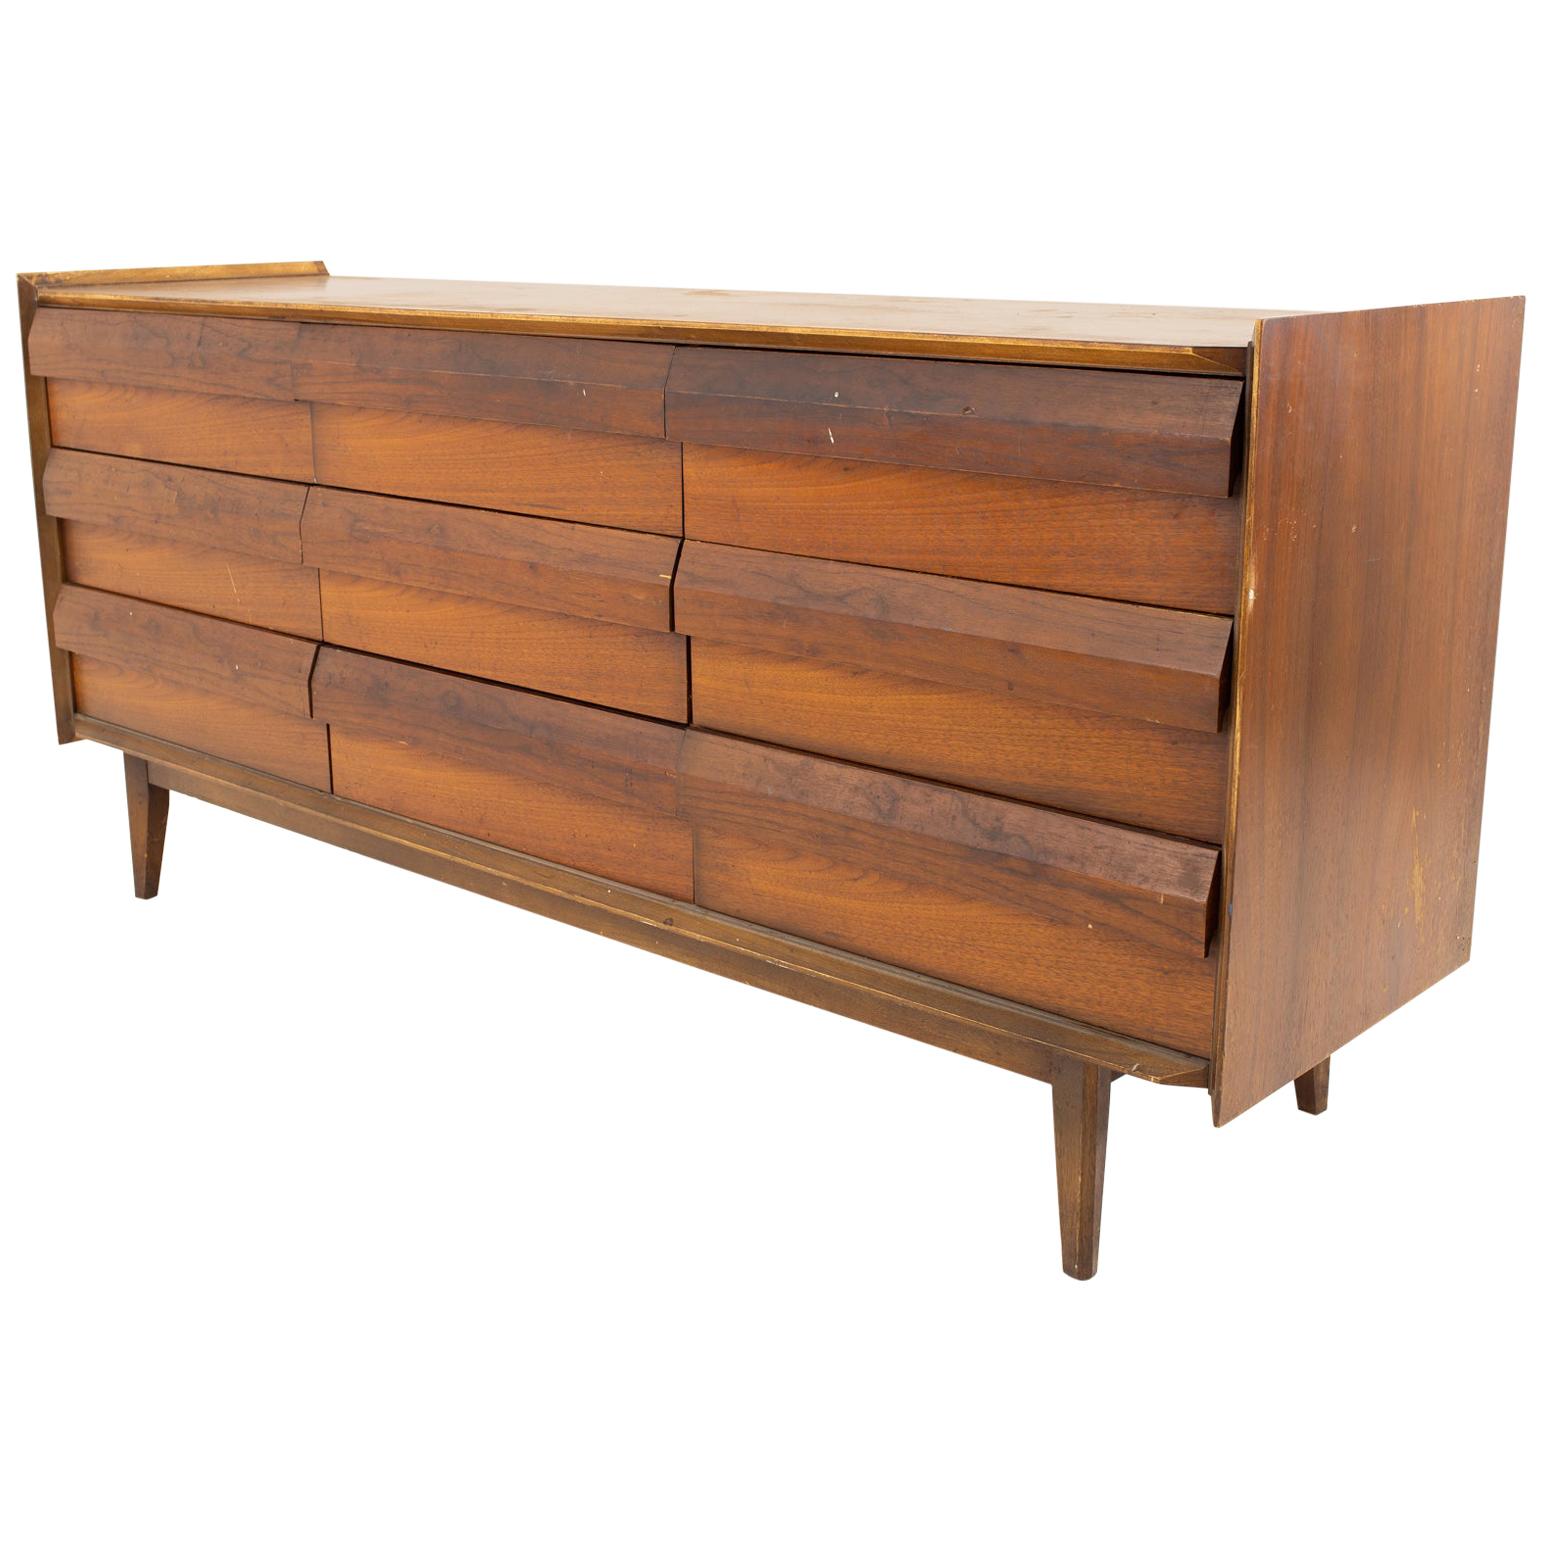 Lane first edition midcentury walnut 9-drawer lowboy dresser
Dresser measures: 66 wide x 18 deep x 30 high

This price includes getting this piece in what we call restored vintage condition. That means the piece is permanently fixed upon purchase